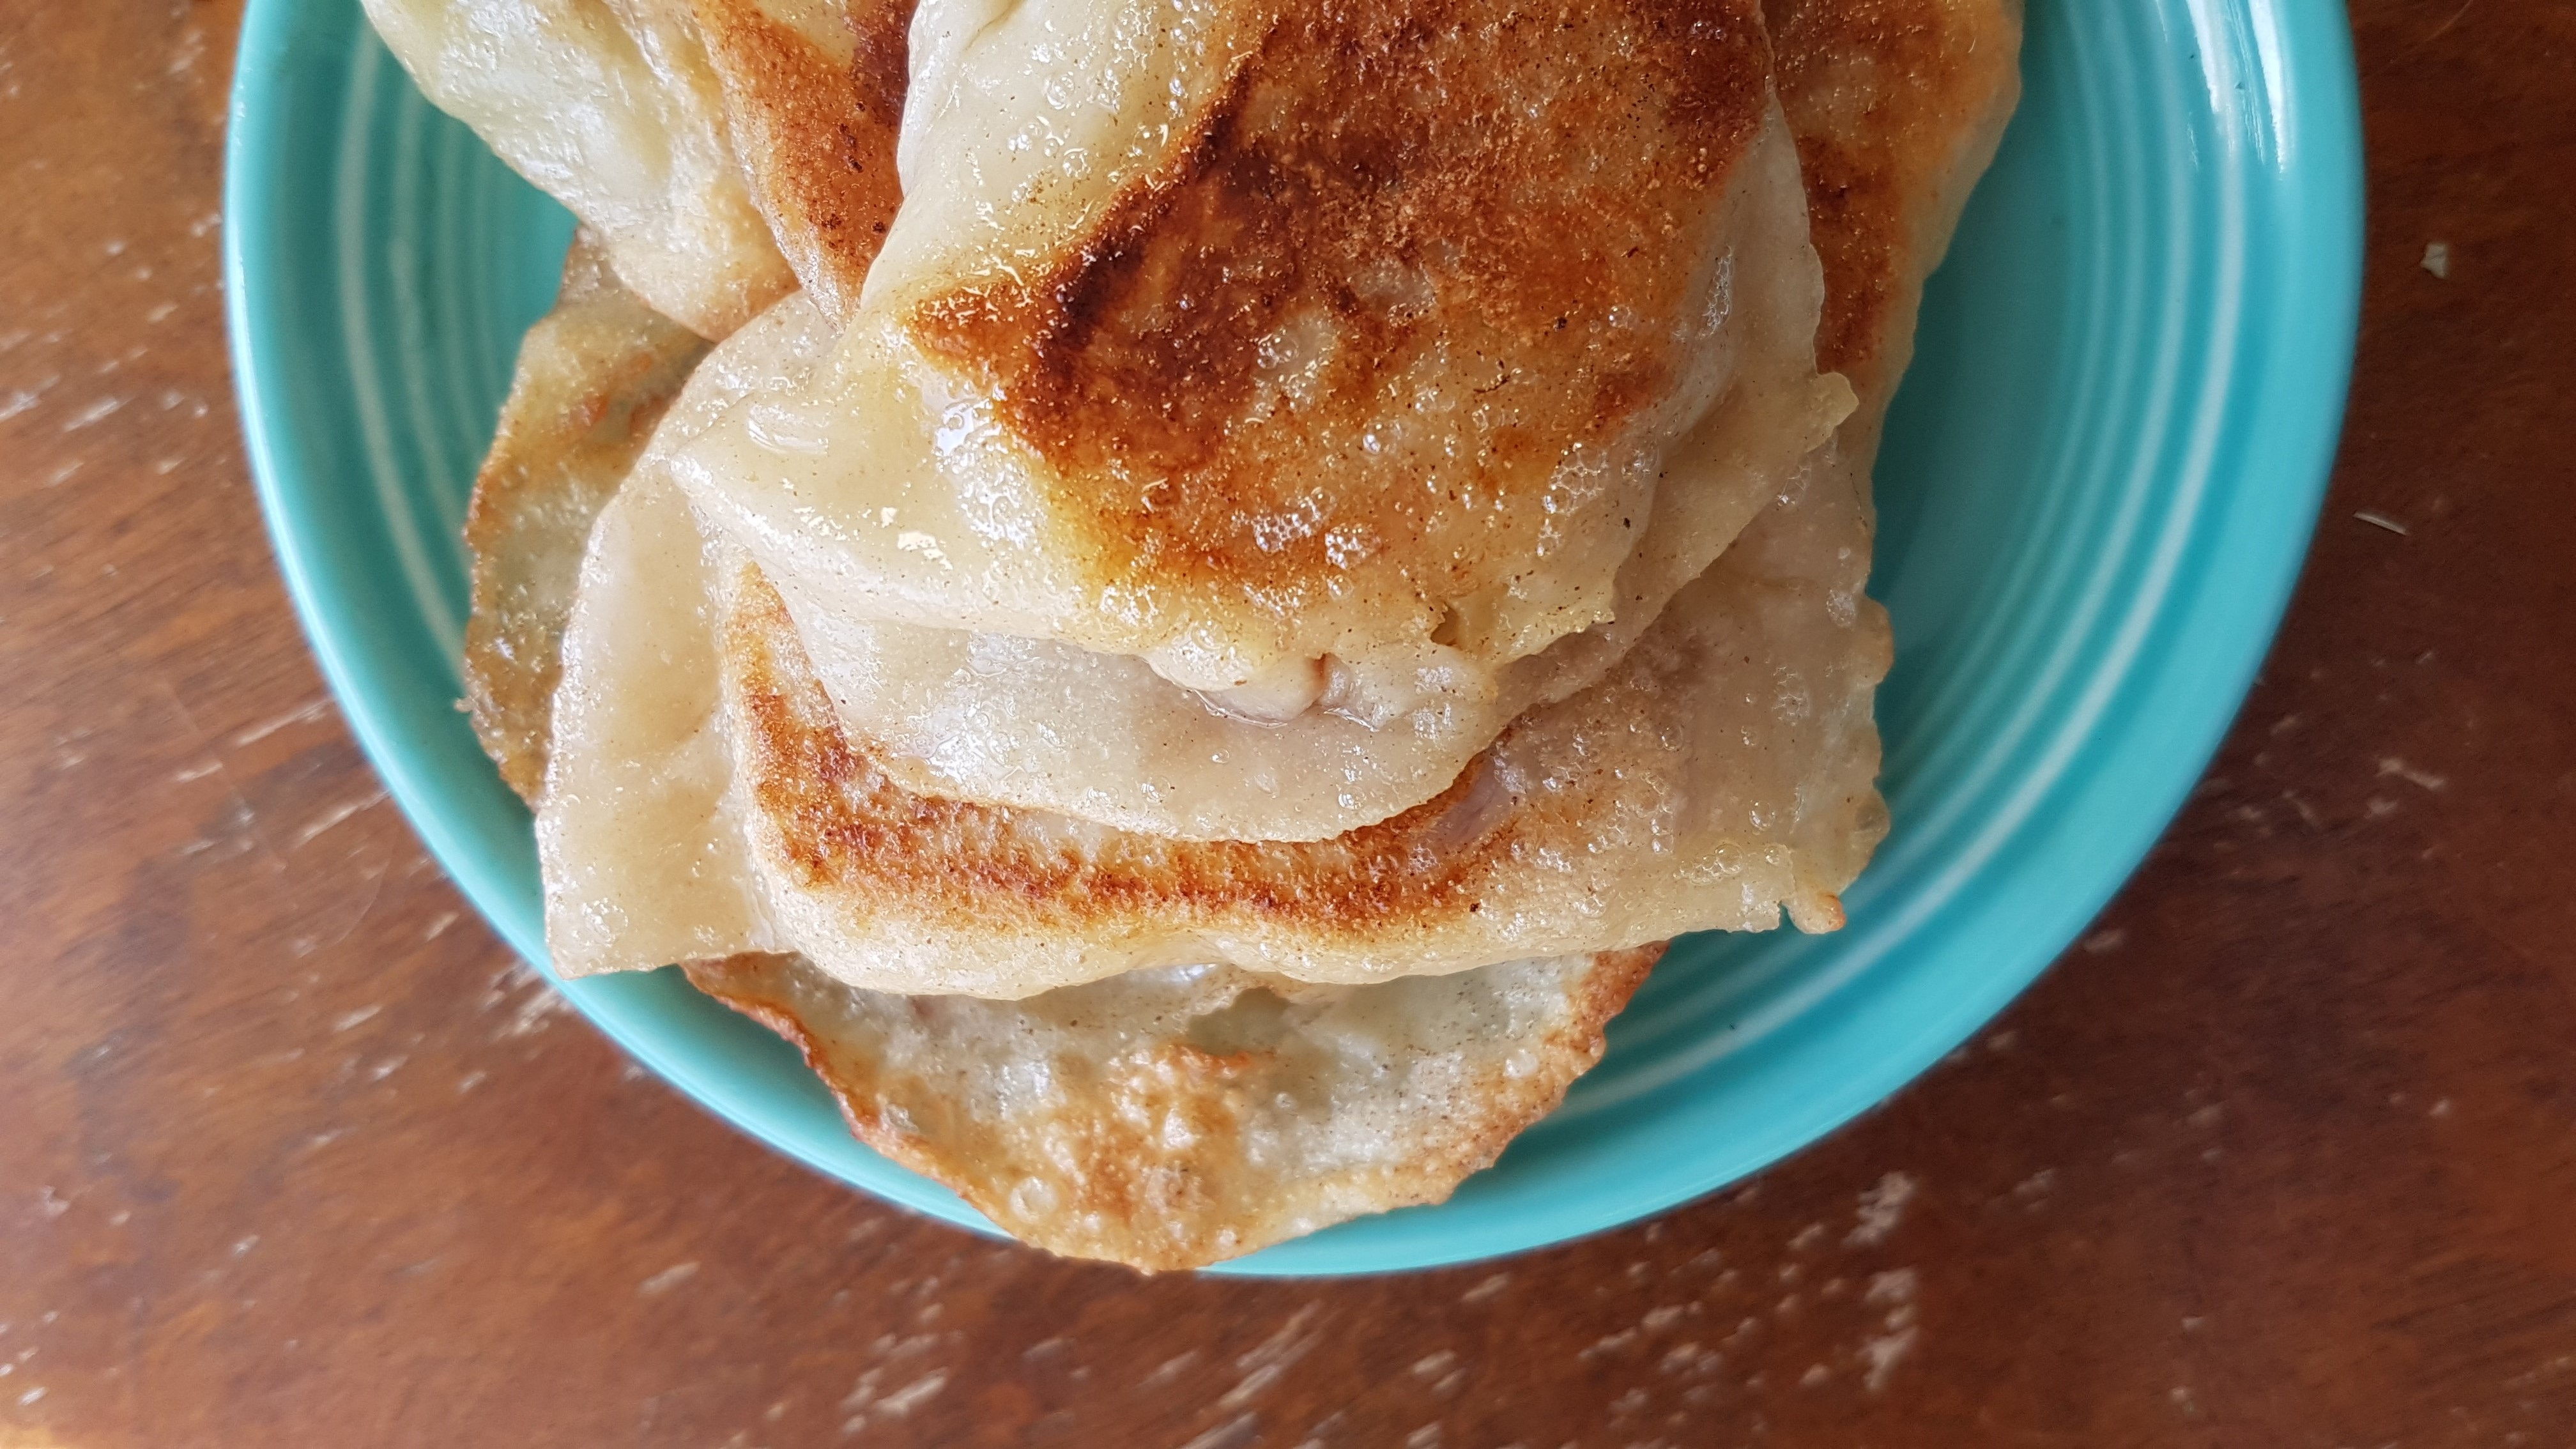 Who can resist pierogies, Especially when they come with free cookies?!